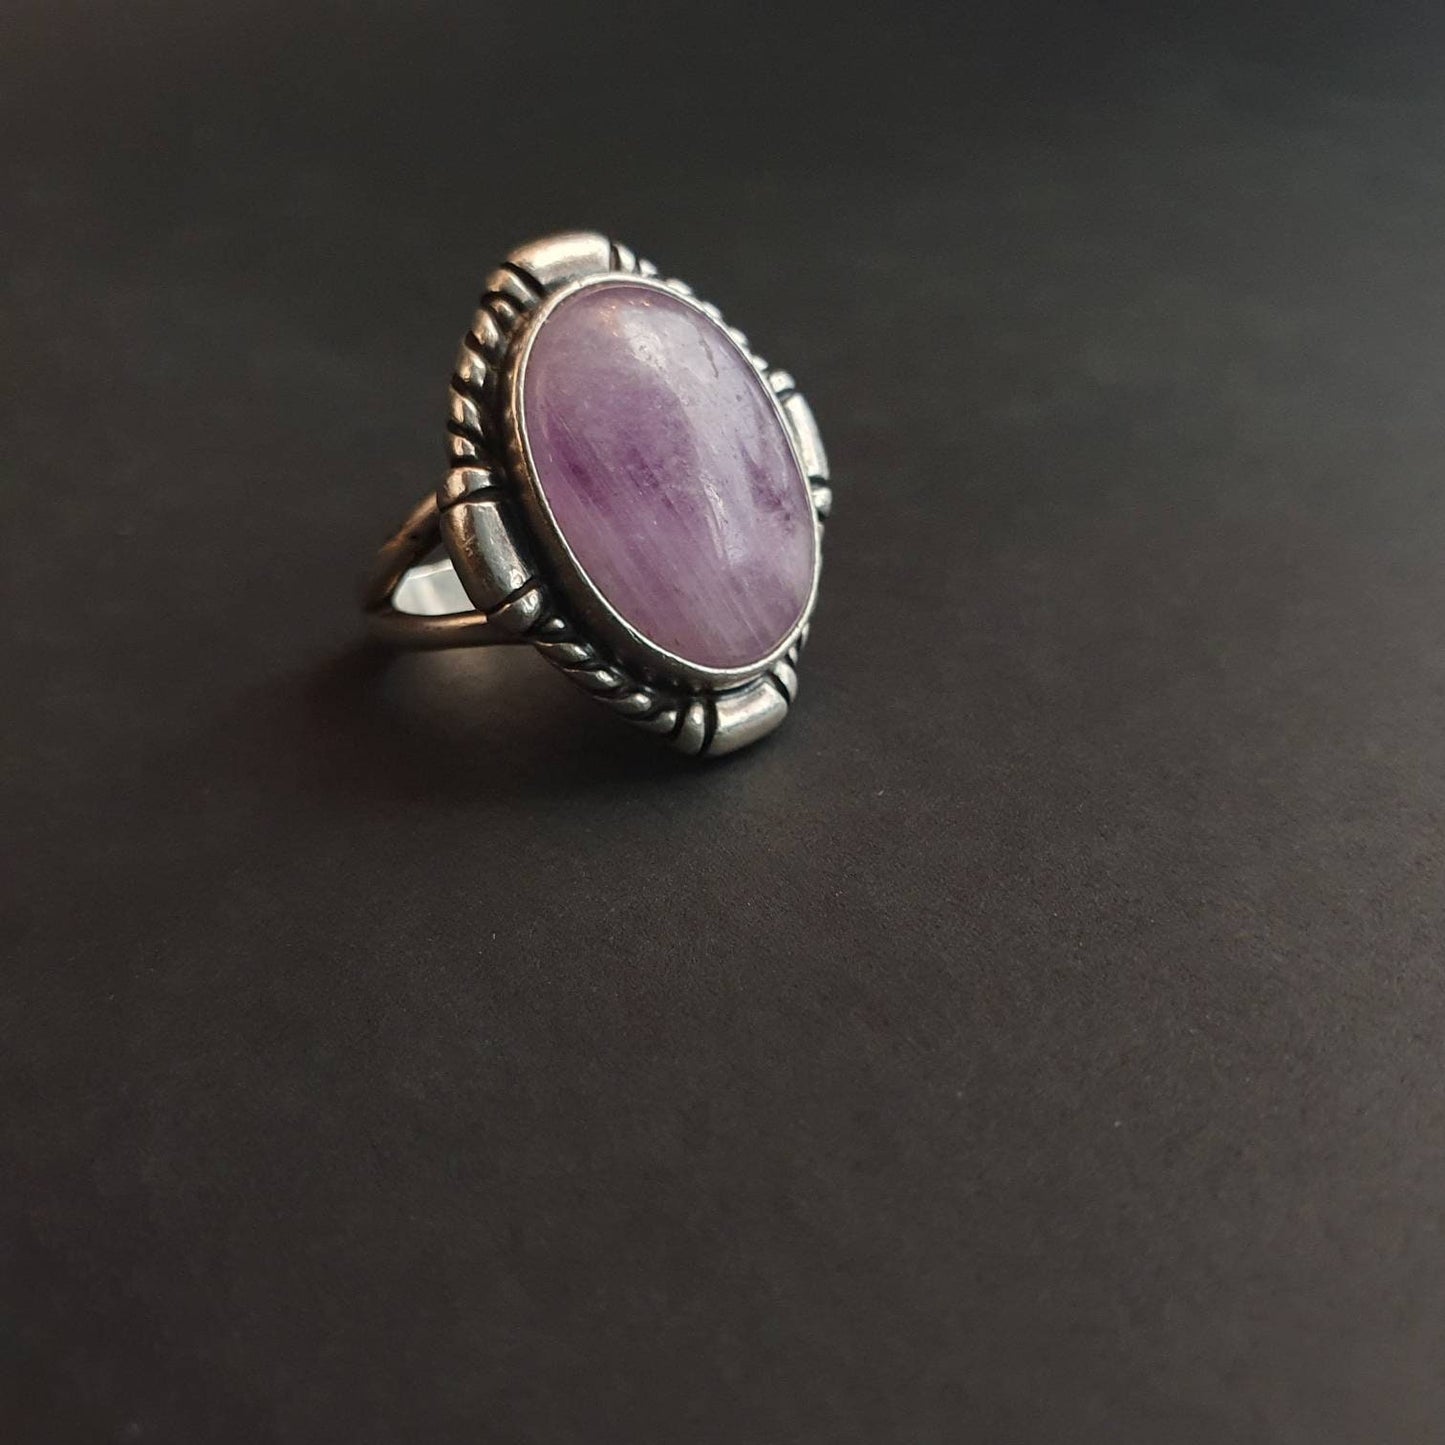 Amethyst ring, sterling silver Statement ring, Chunky ring, ornate ring, British Hallmarked jewellery